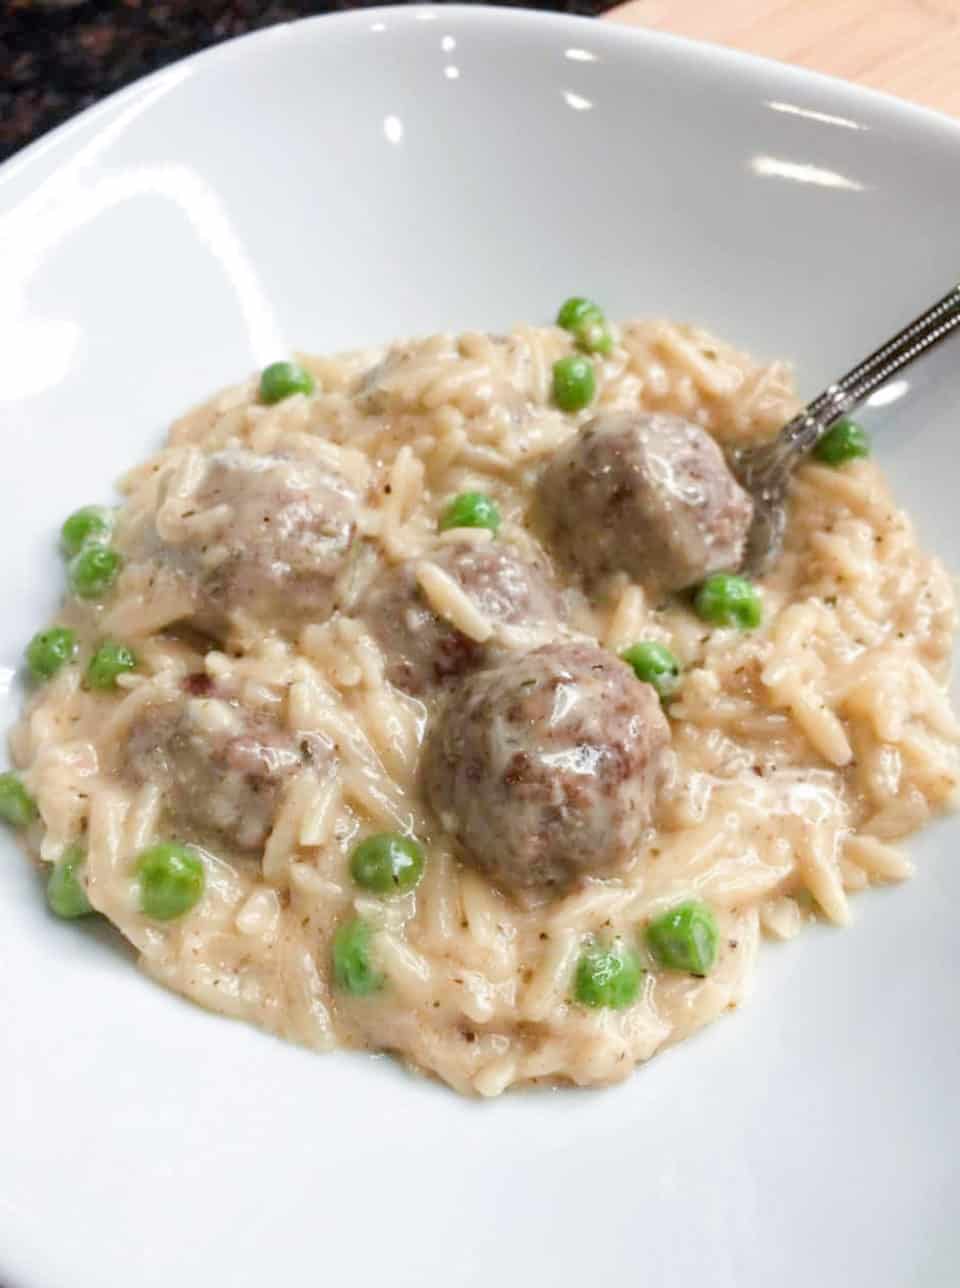 Finished picture of Creamy Orzo with Meatballs and Peas in a bowl.